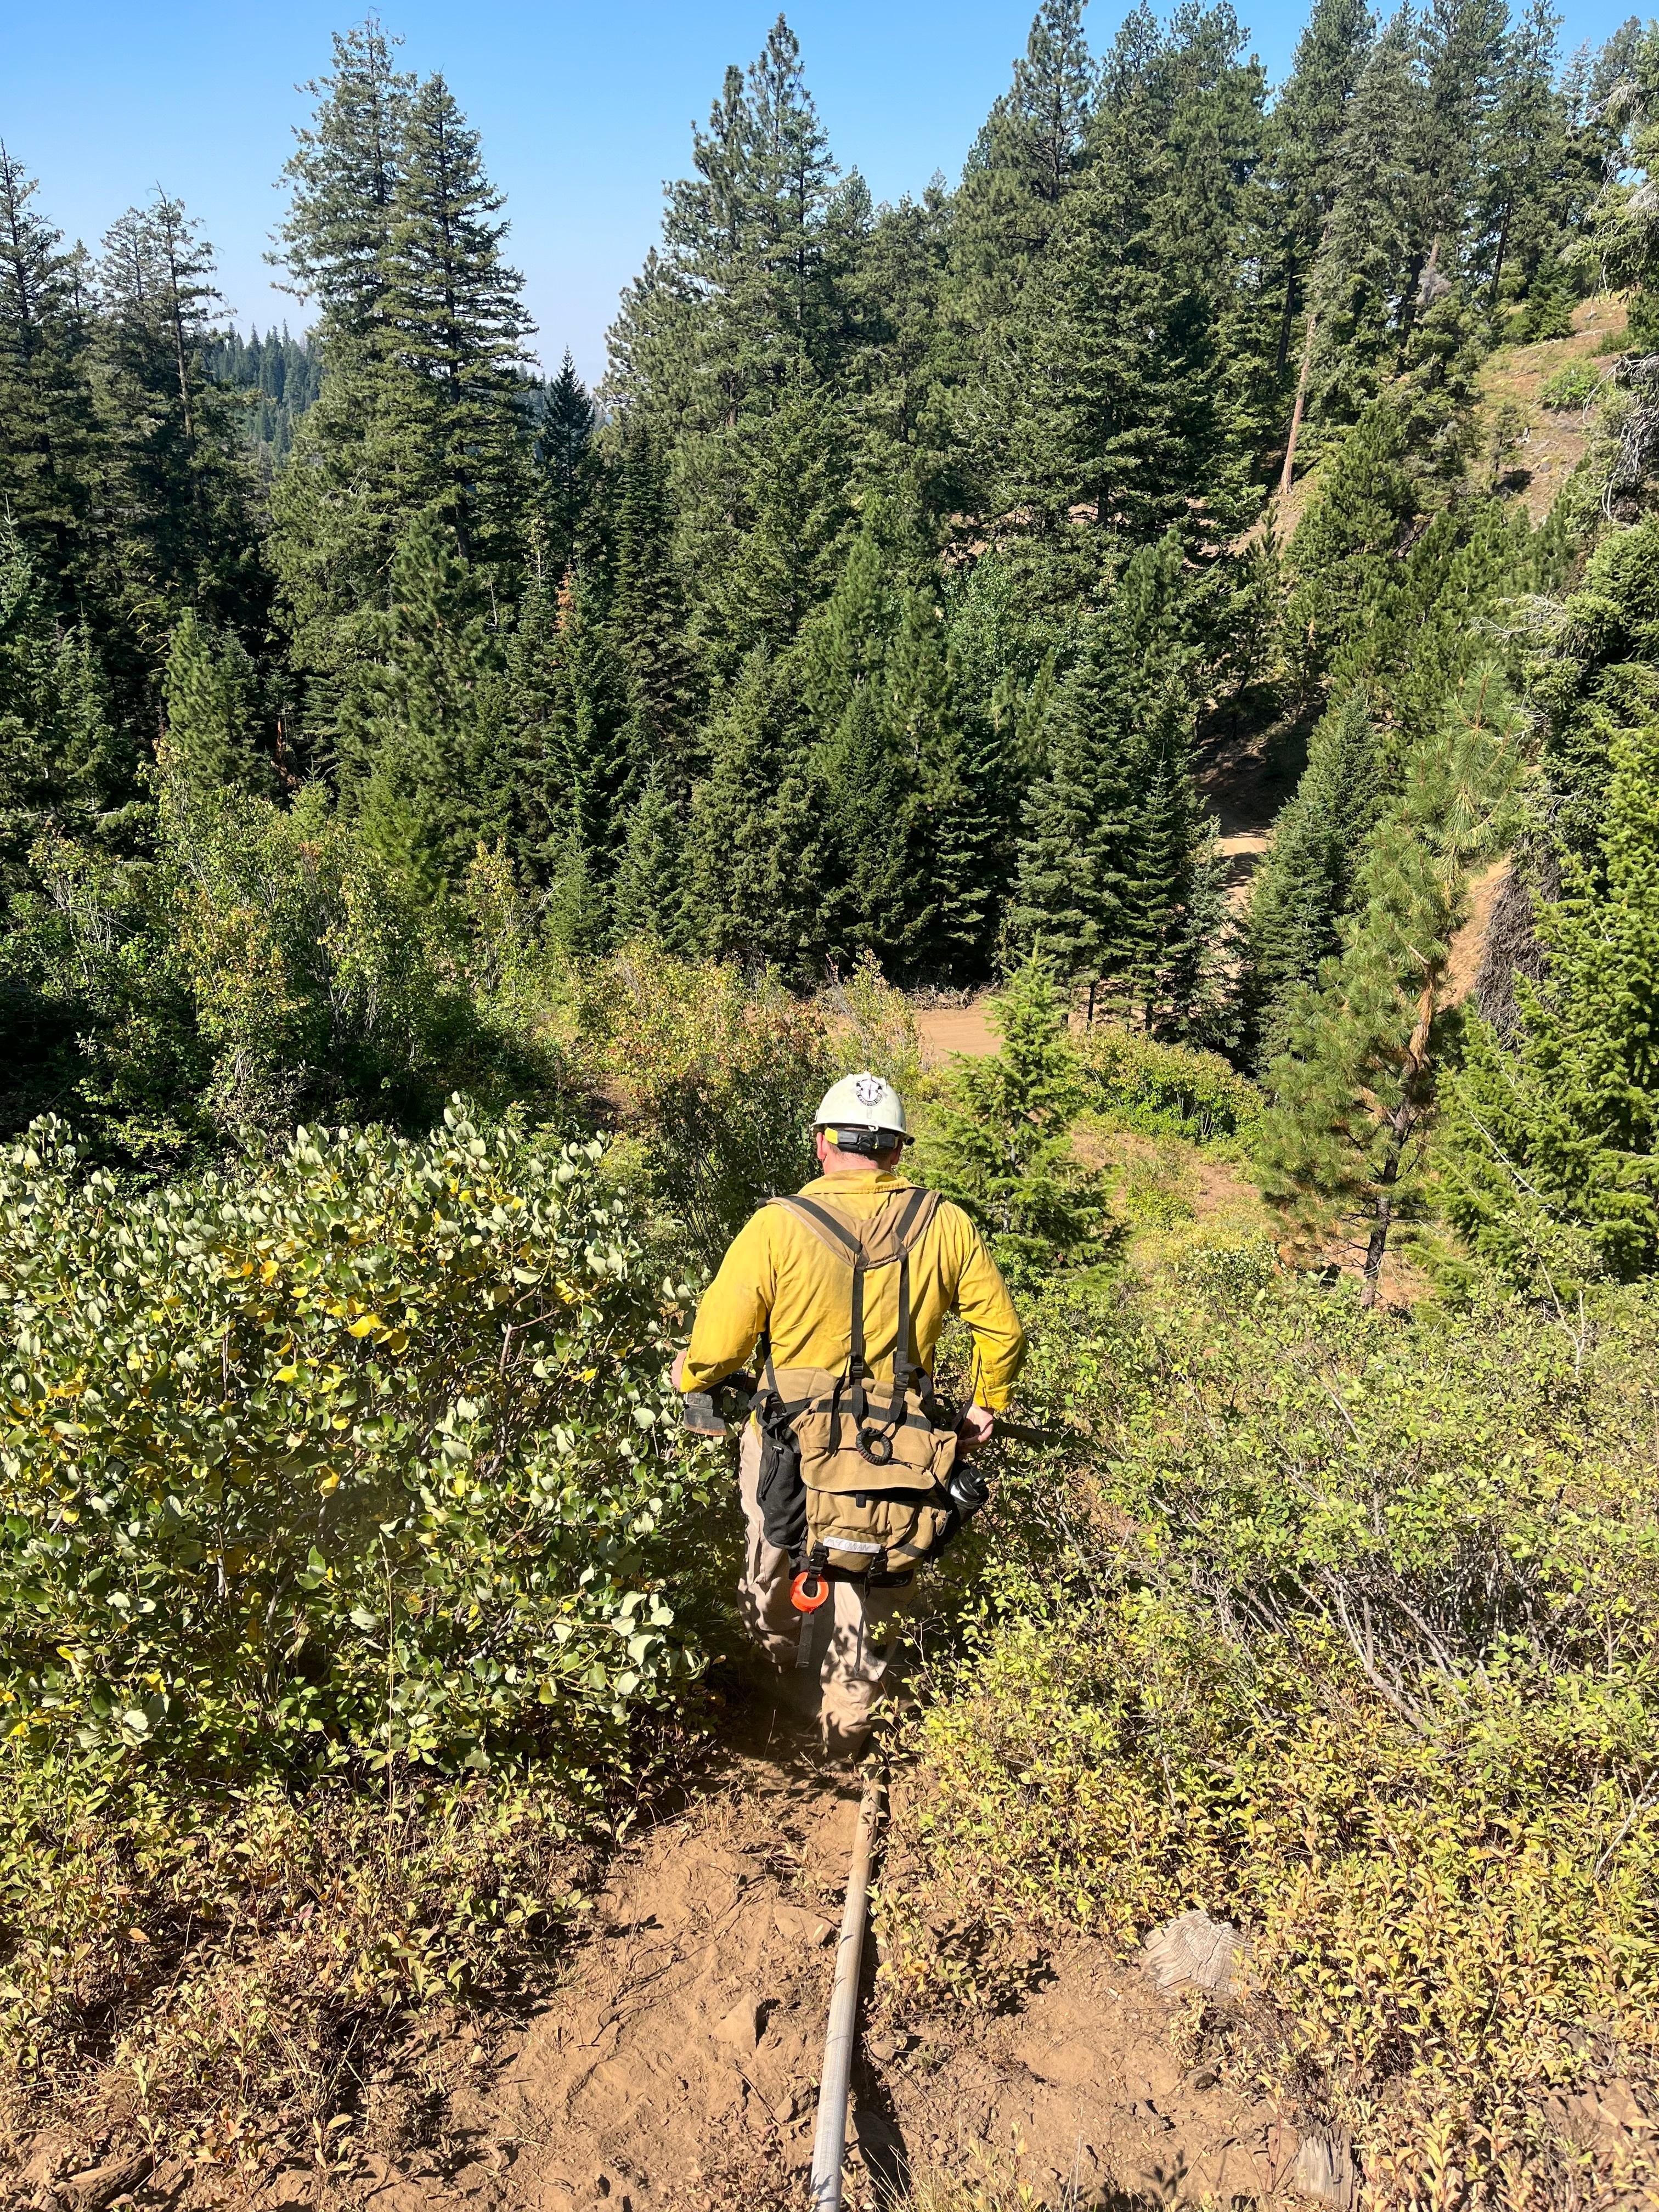 Firefighter walking through the vegetation with a hose laying on the ground. 